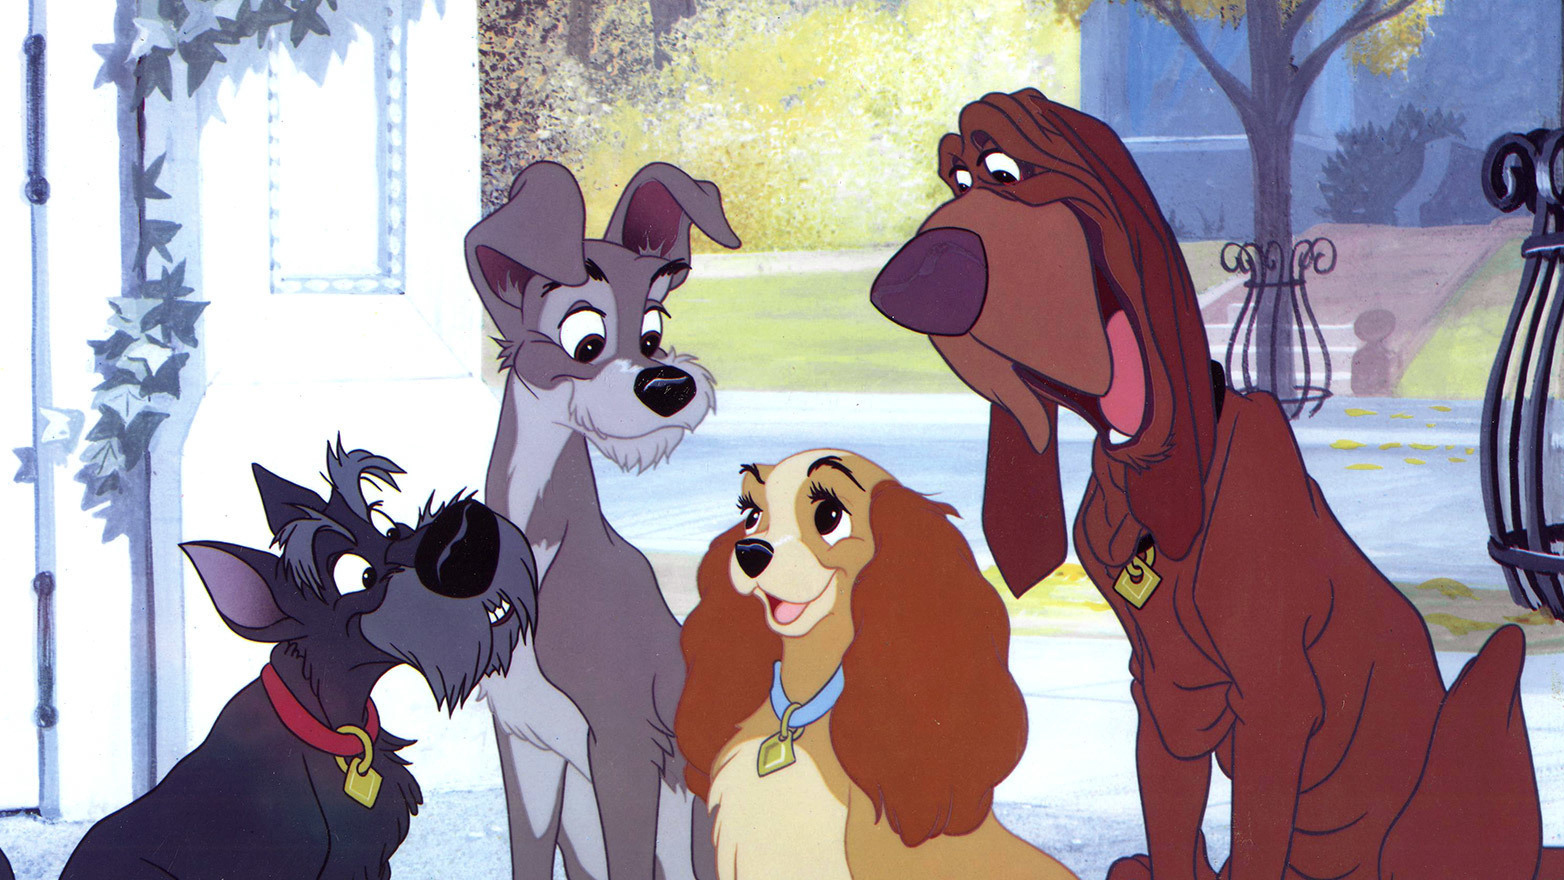 Most Disney Fans Can’t Identify More Than 15/18 of These Movie Foods – Can You? Lady And The Tramp